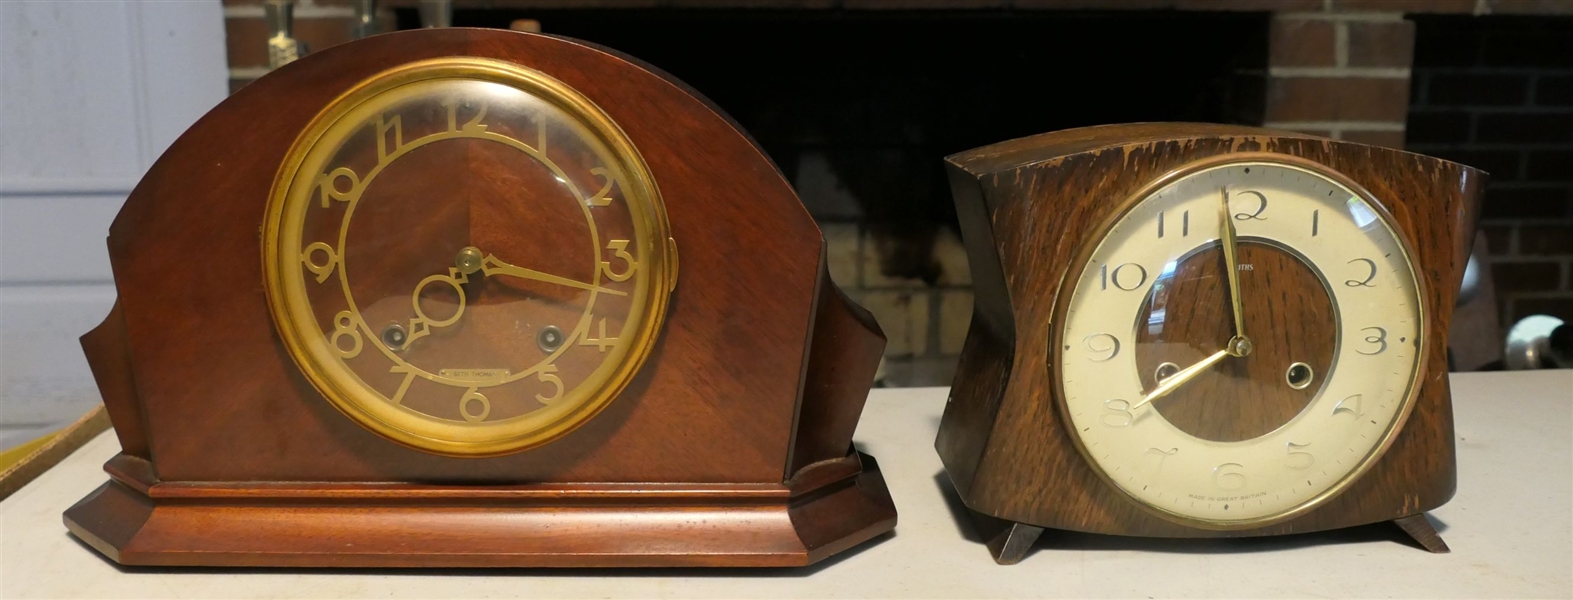 Nice Seth Thomas Art Deco Mantel Clock in Mahogany Case with Wood Dial and Smiths Made in Great Britain Clock - Both Have Key and Pendulum - Smiths Clock Measures 7" Tall Seth Thomas Measures 9...